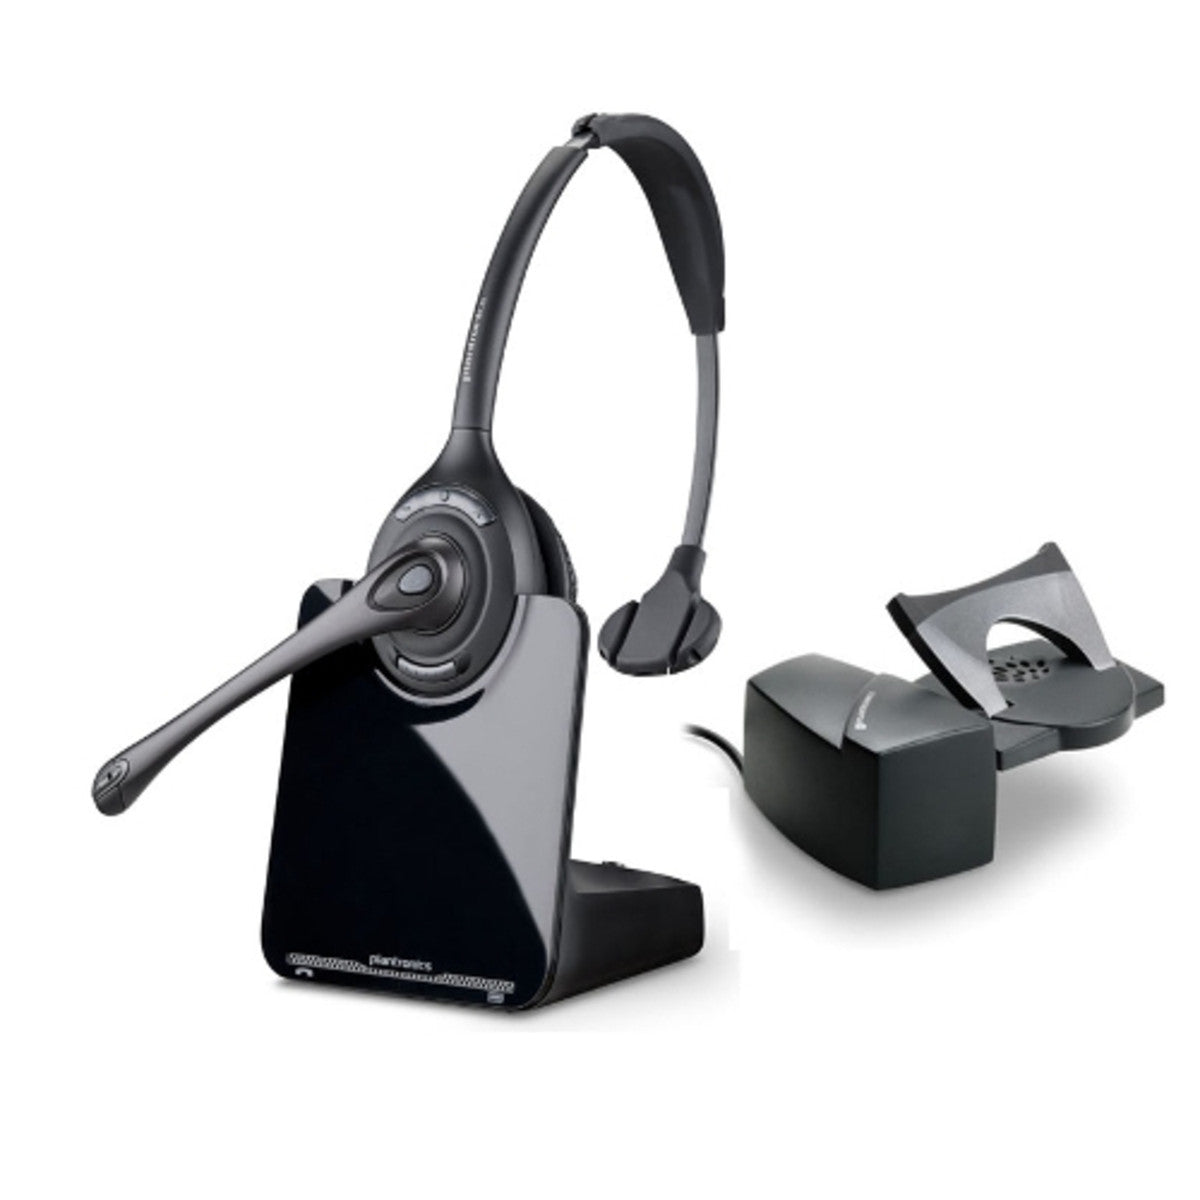 Plantronics 84691-11 CS510 Wireless Headset can remotely answer/end calls from up to 350 feet.